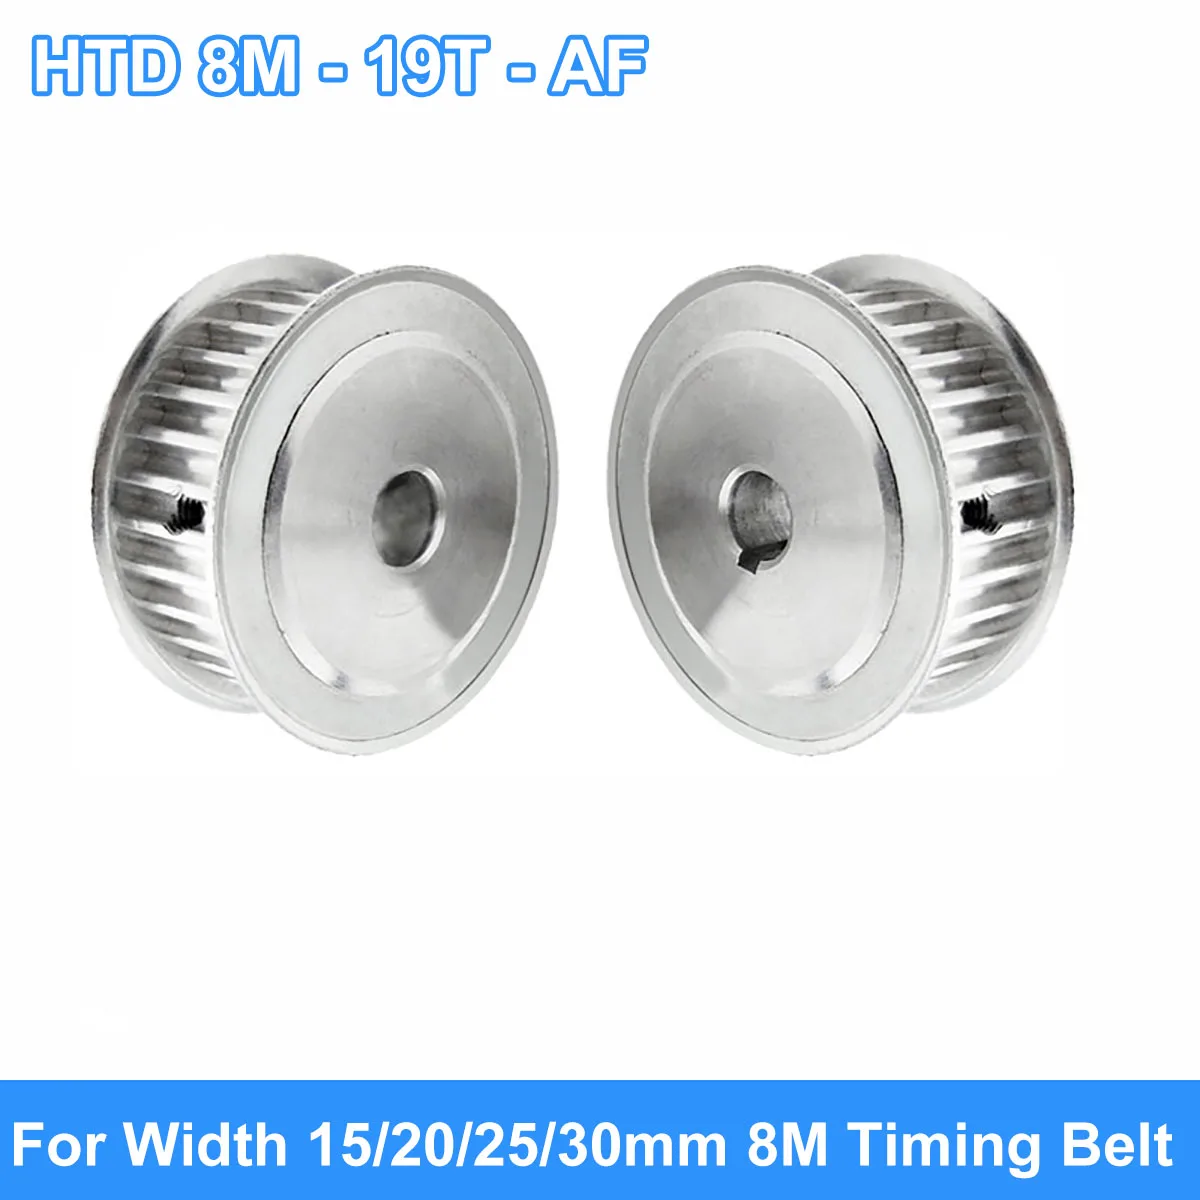 HTD 8M 19Tooth Timing Pulley 8M-19T Synchronus Pulley Bore 8/10/12/14/15/16/17/18/19/20mm For Width 15/20/25/30mm 8M Timing Belt